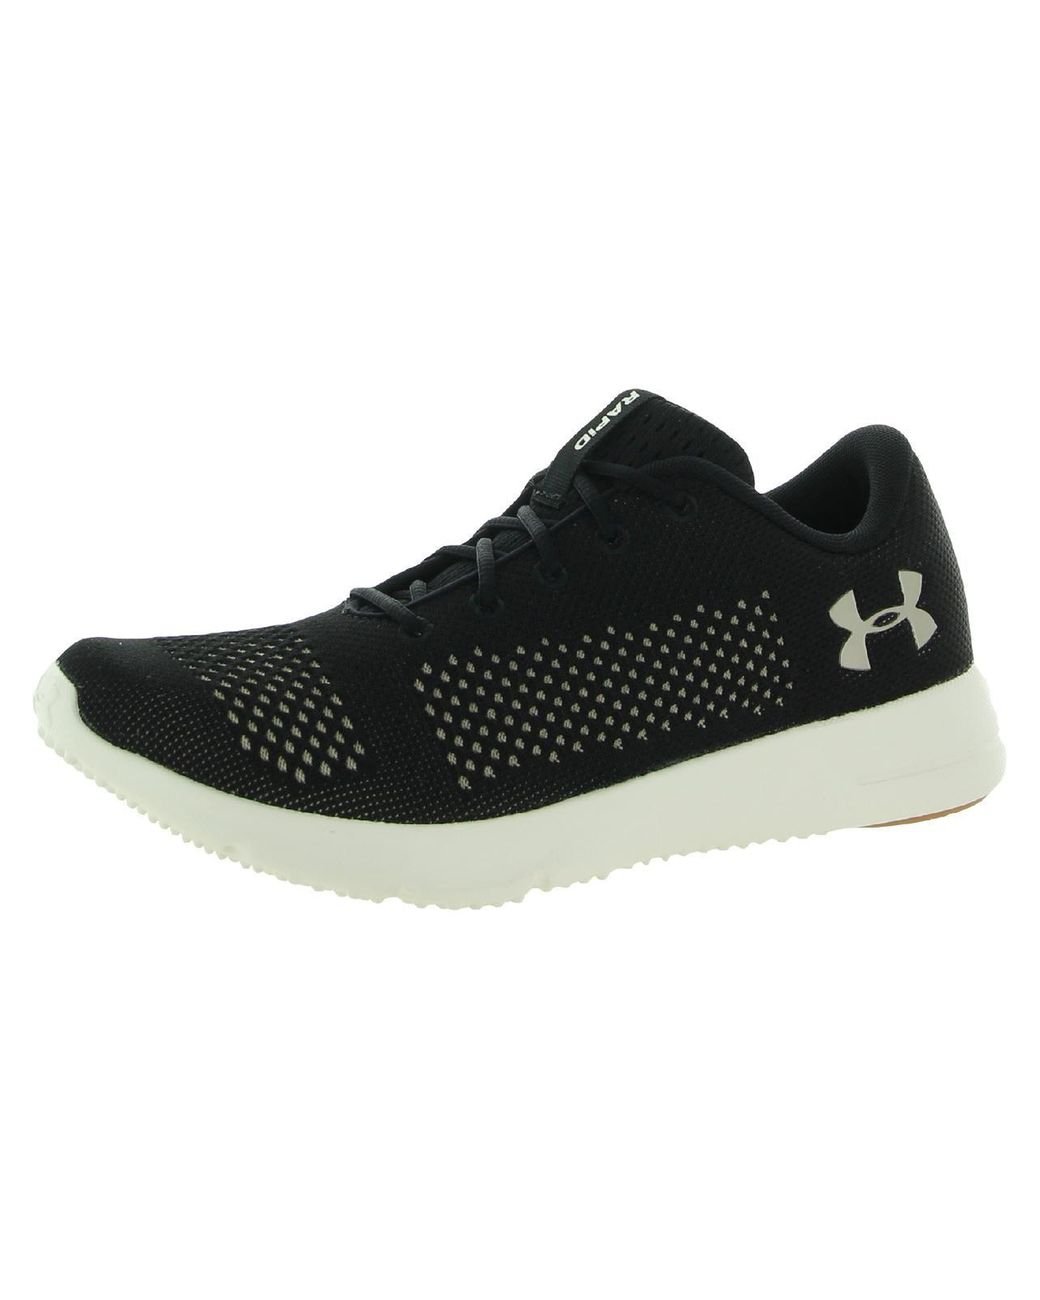 Under Armour Rapid Lightweight Flexible Running Shoes in Black | Lyst